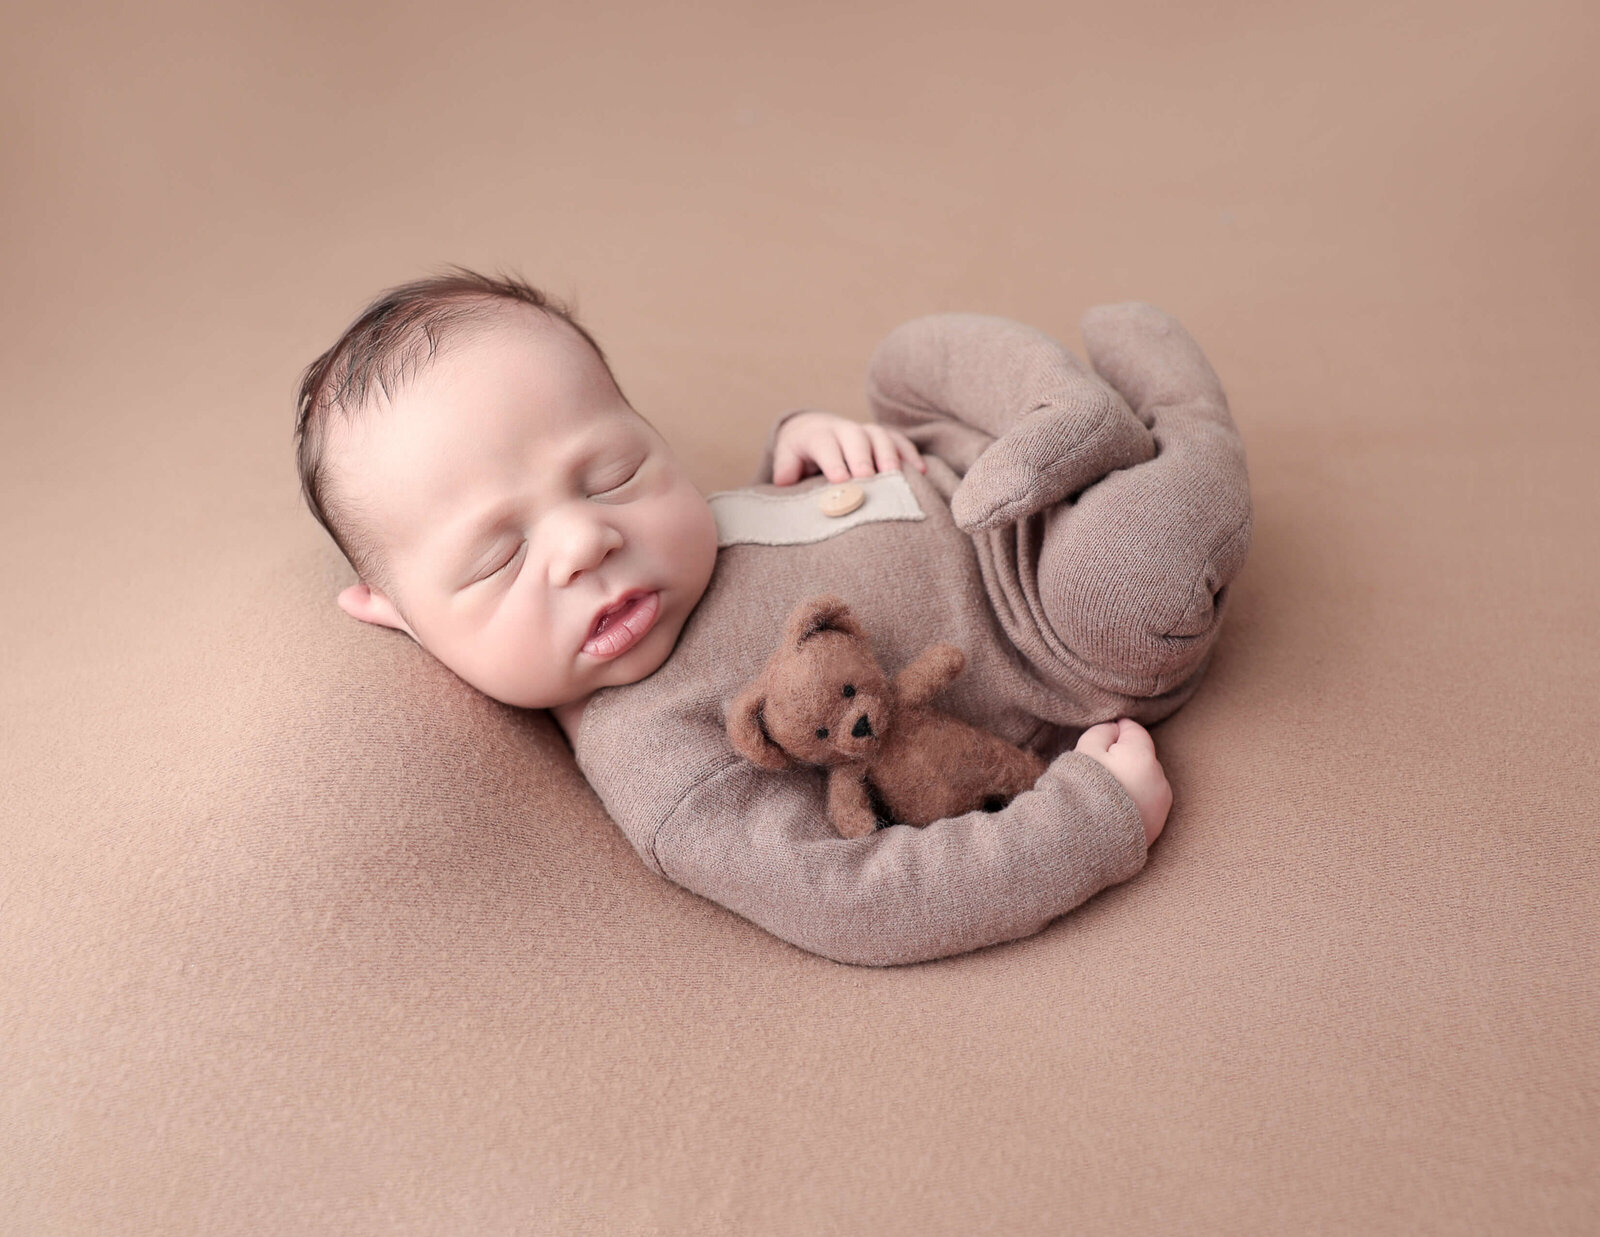 Sleeping baby boy at our studio in Rochester, Ny.